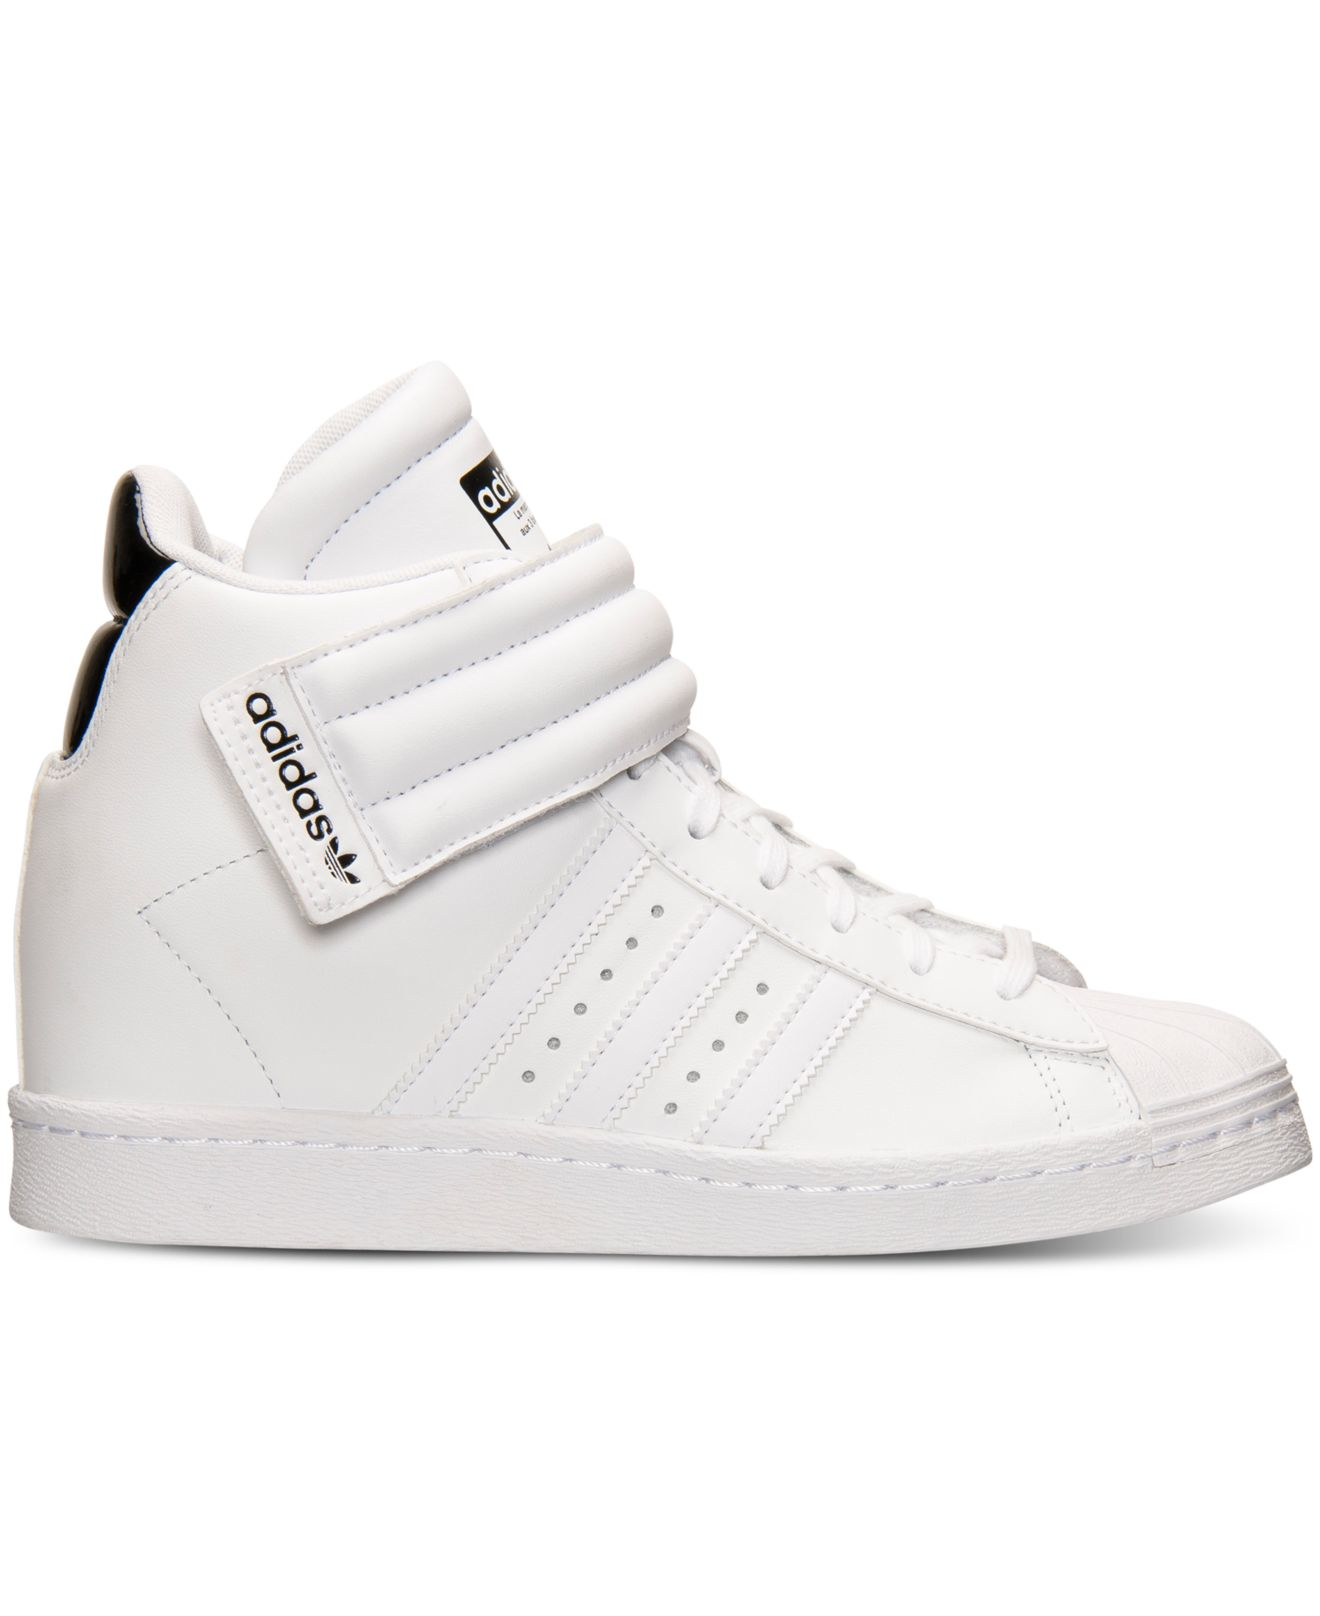 adidas superstar up strap Possible Futures